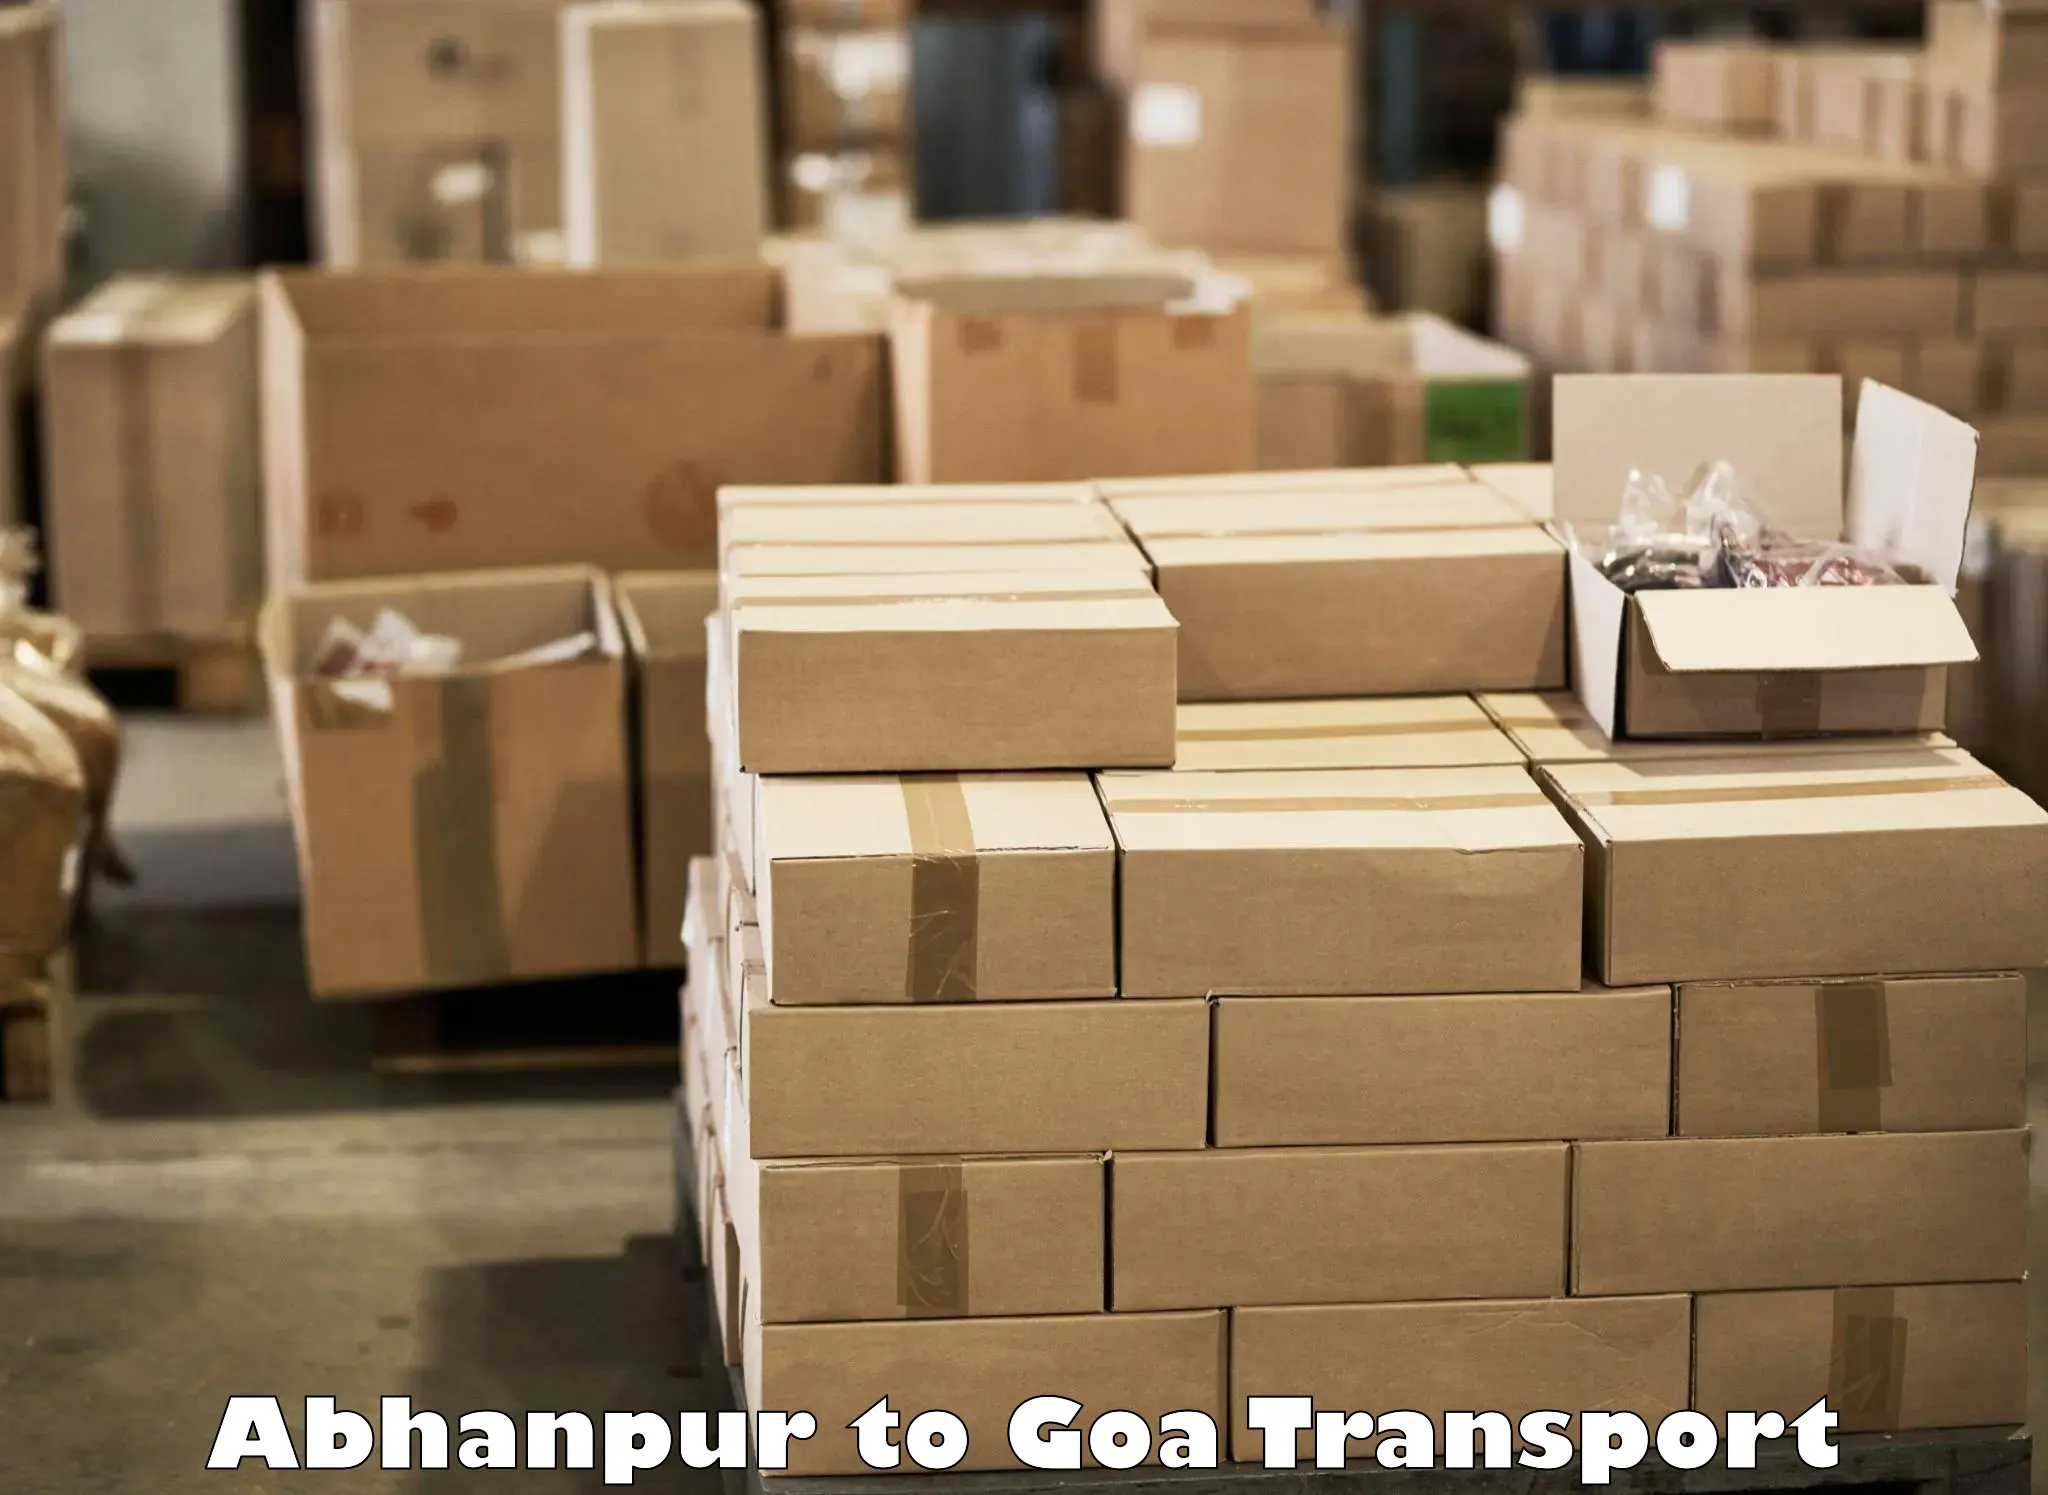 Daily parcel service transport Abhanpur to Goa